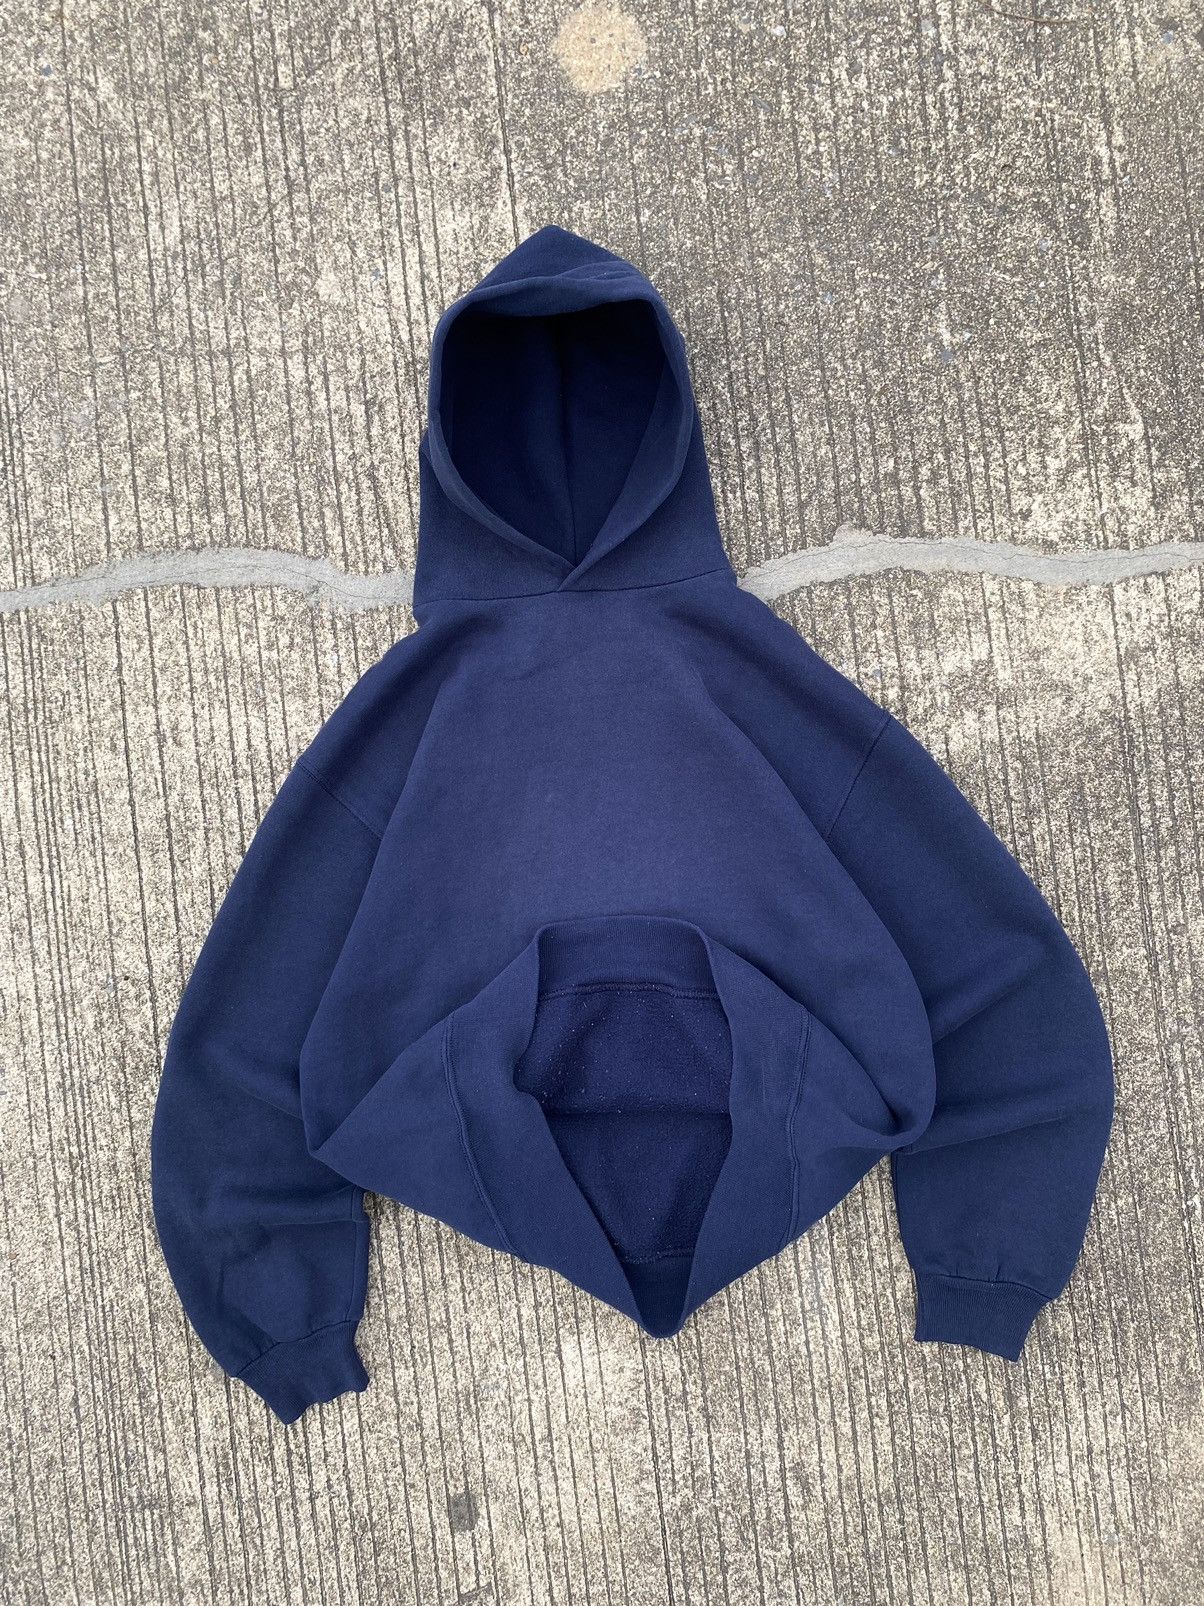 Pre-owned Russell Athletic X Vintage Navy 90's Russell Athletic Hoodie